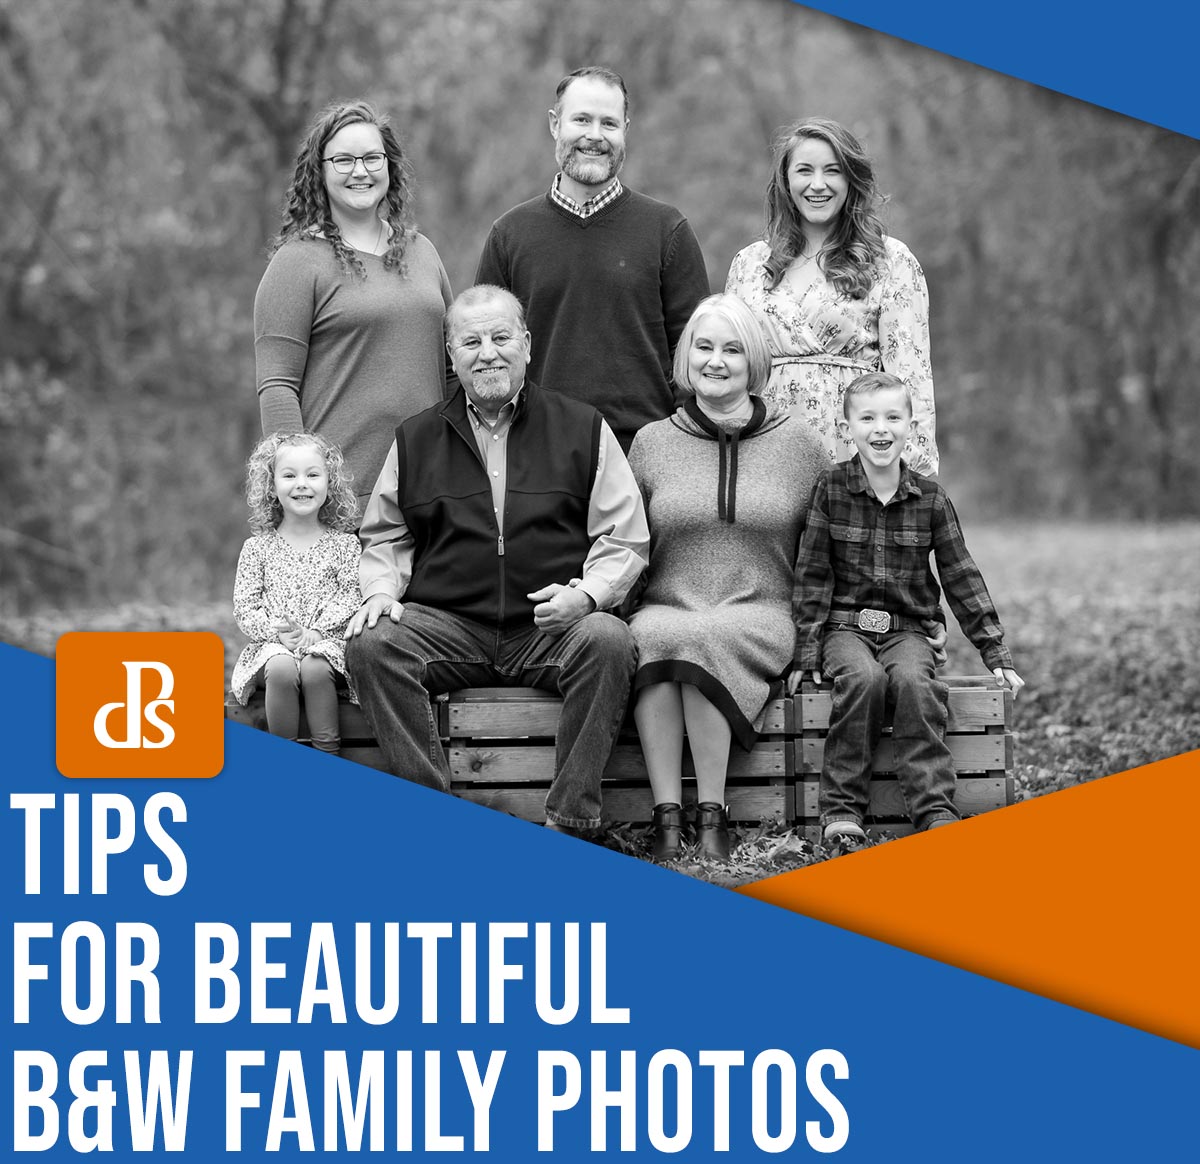 Tips for beautiful B&W family photos